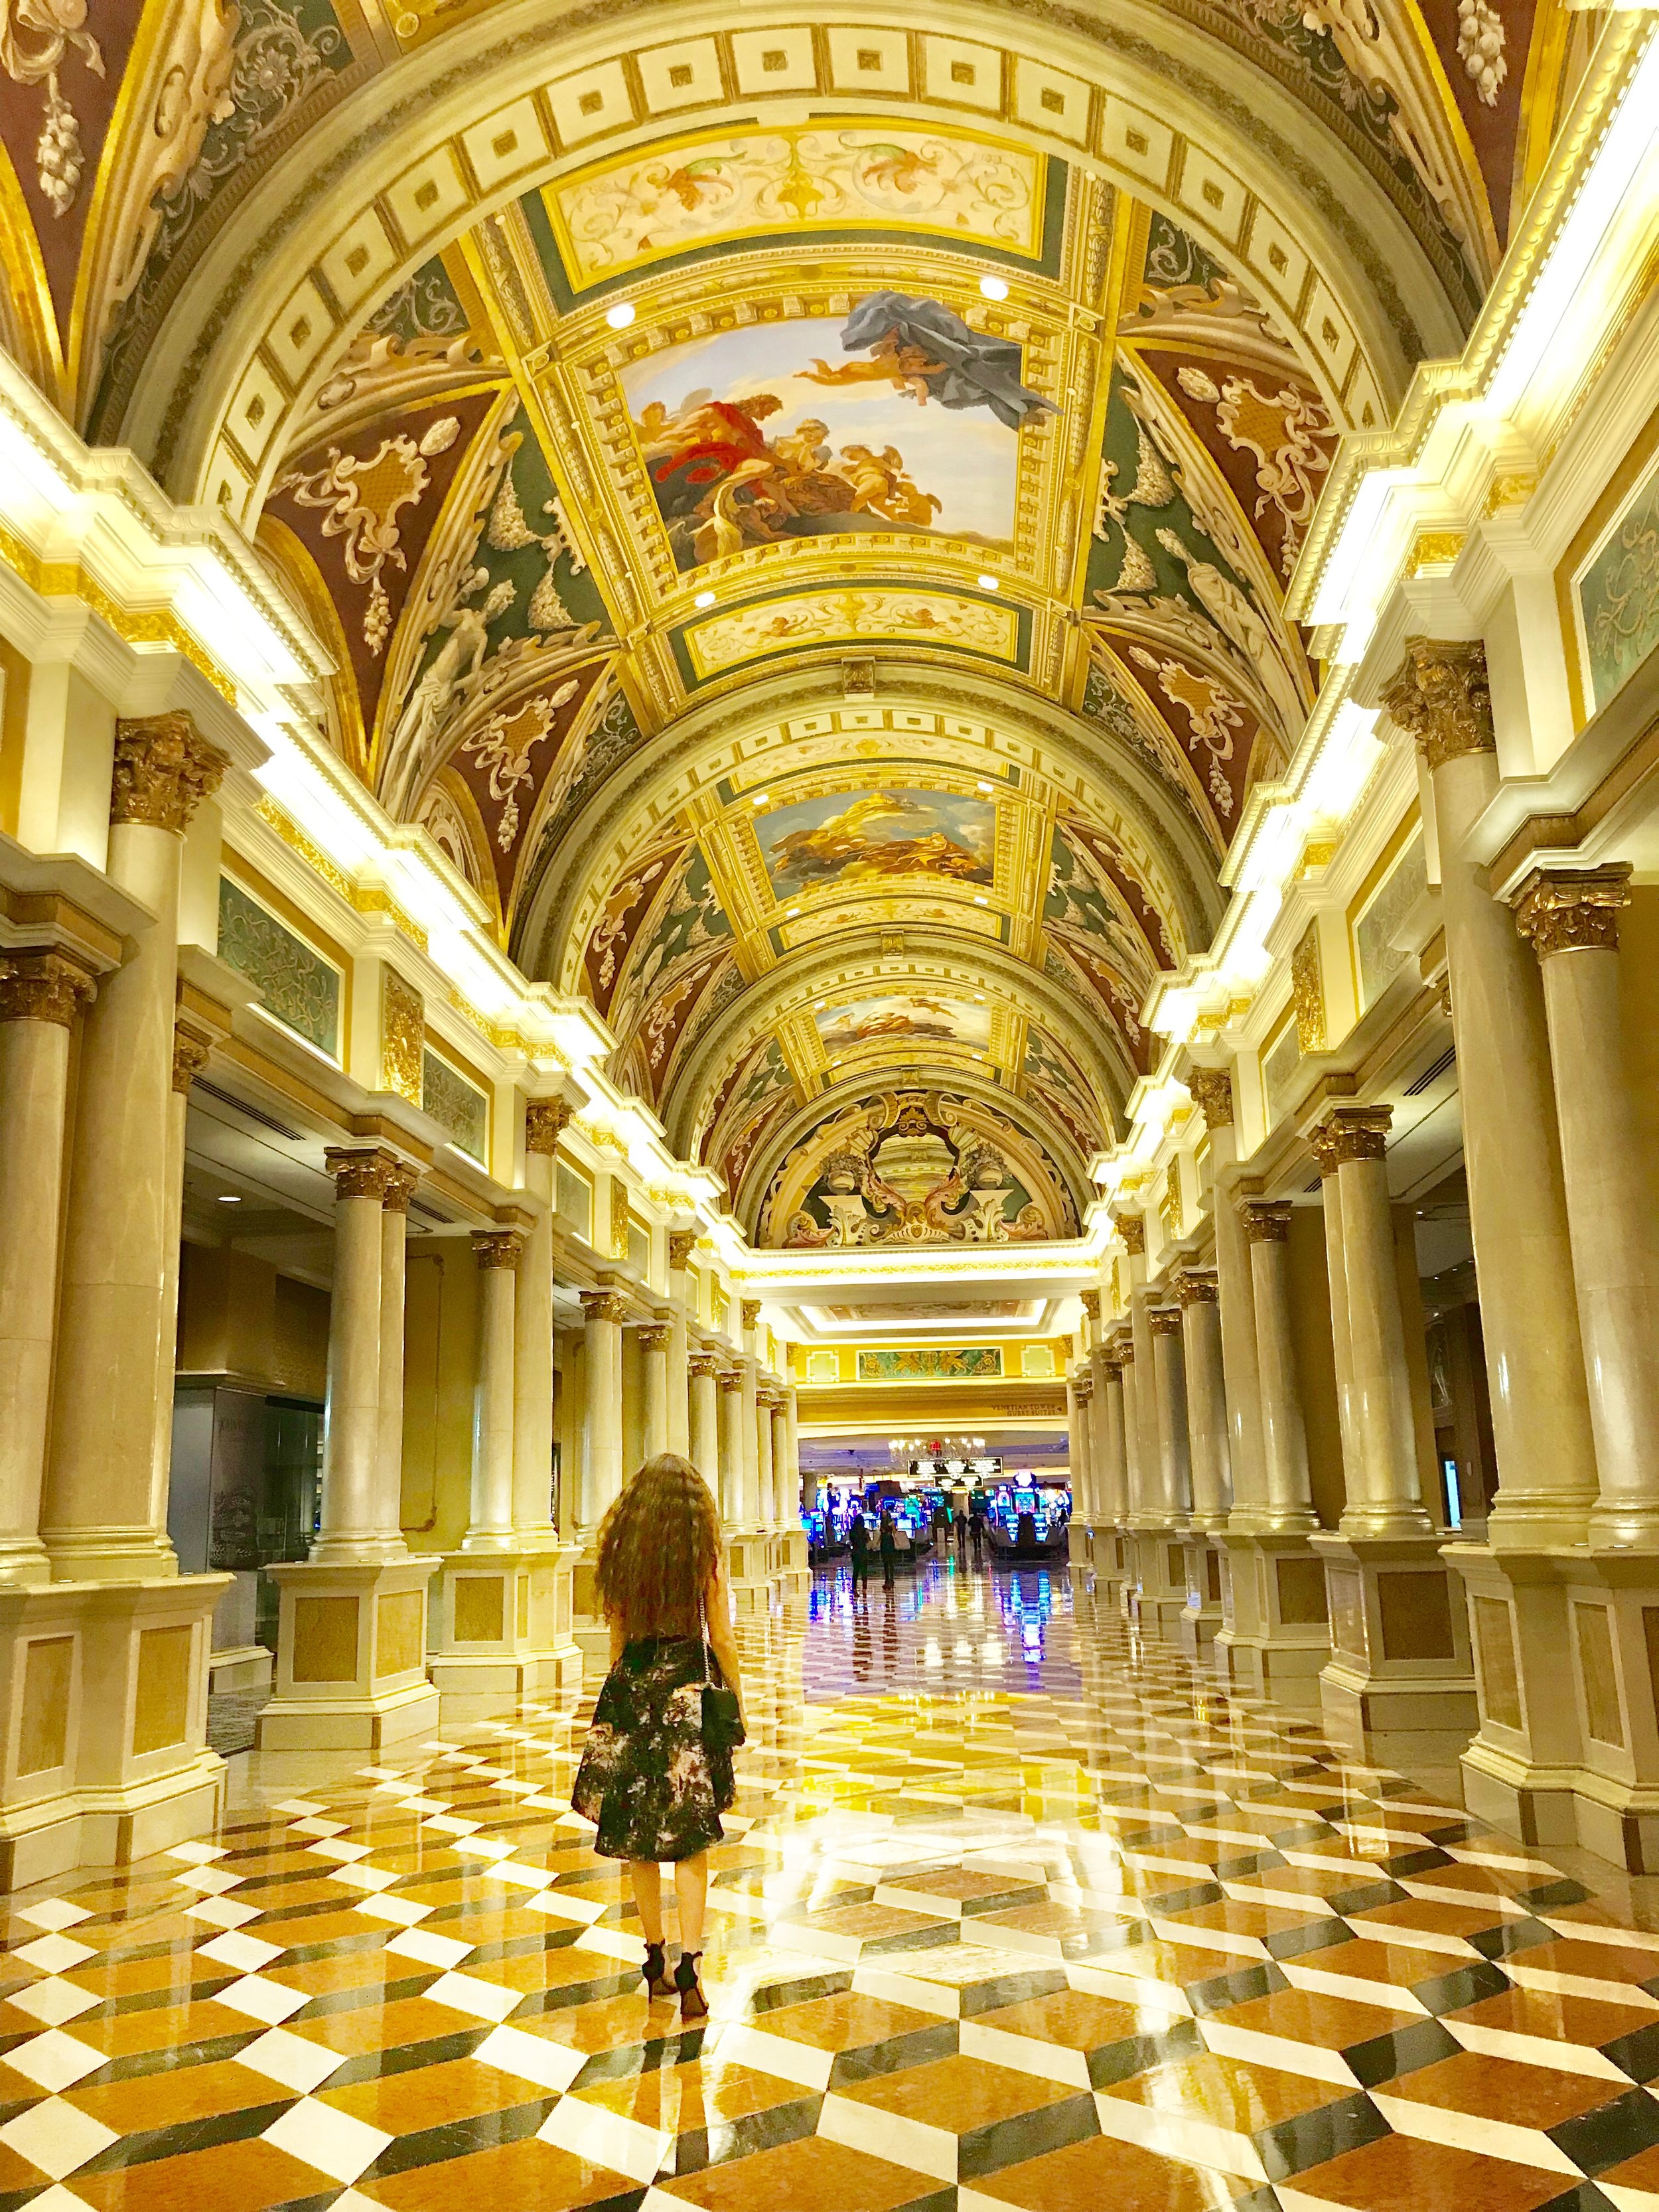 Las Vegas Travel Guide - Top things to do when in Las Vegas - The beautiful hallway in the Venetian Hotel